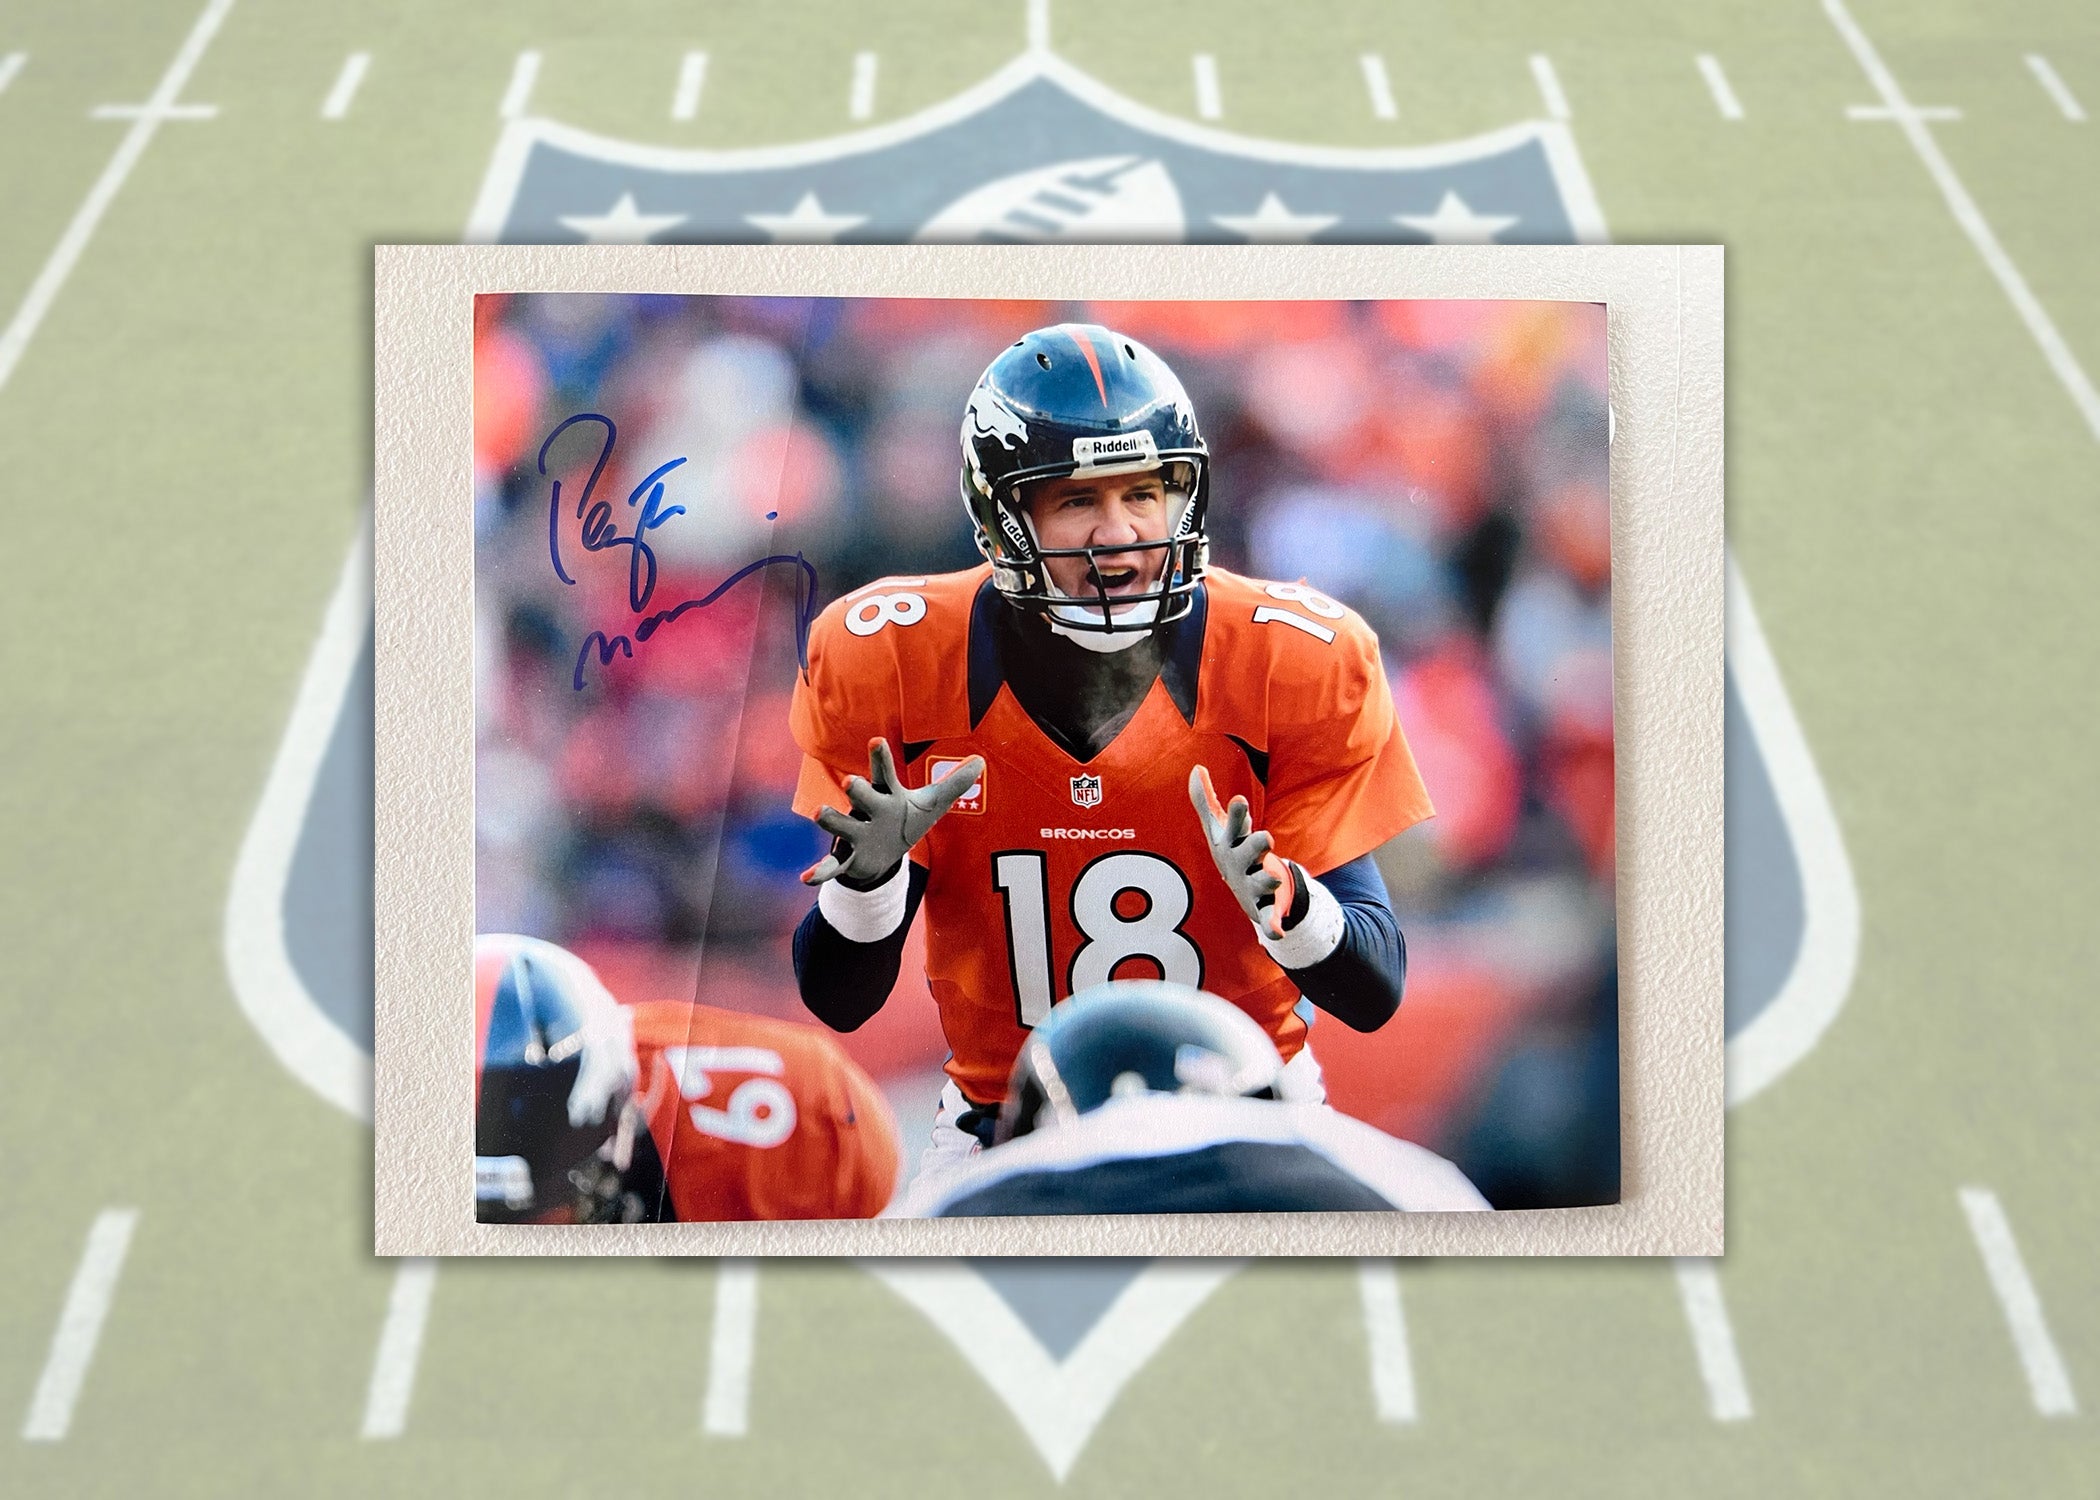 Peyton Manning Denver Broncos 8x10 photo signed with proof (8)